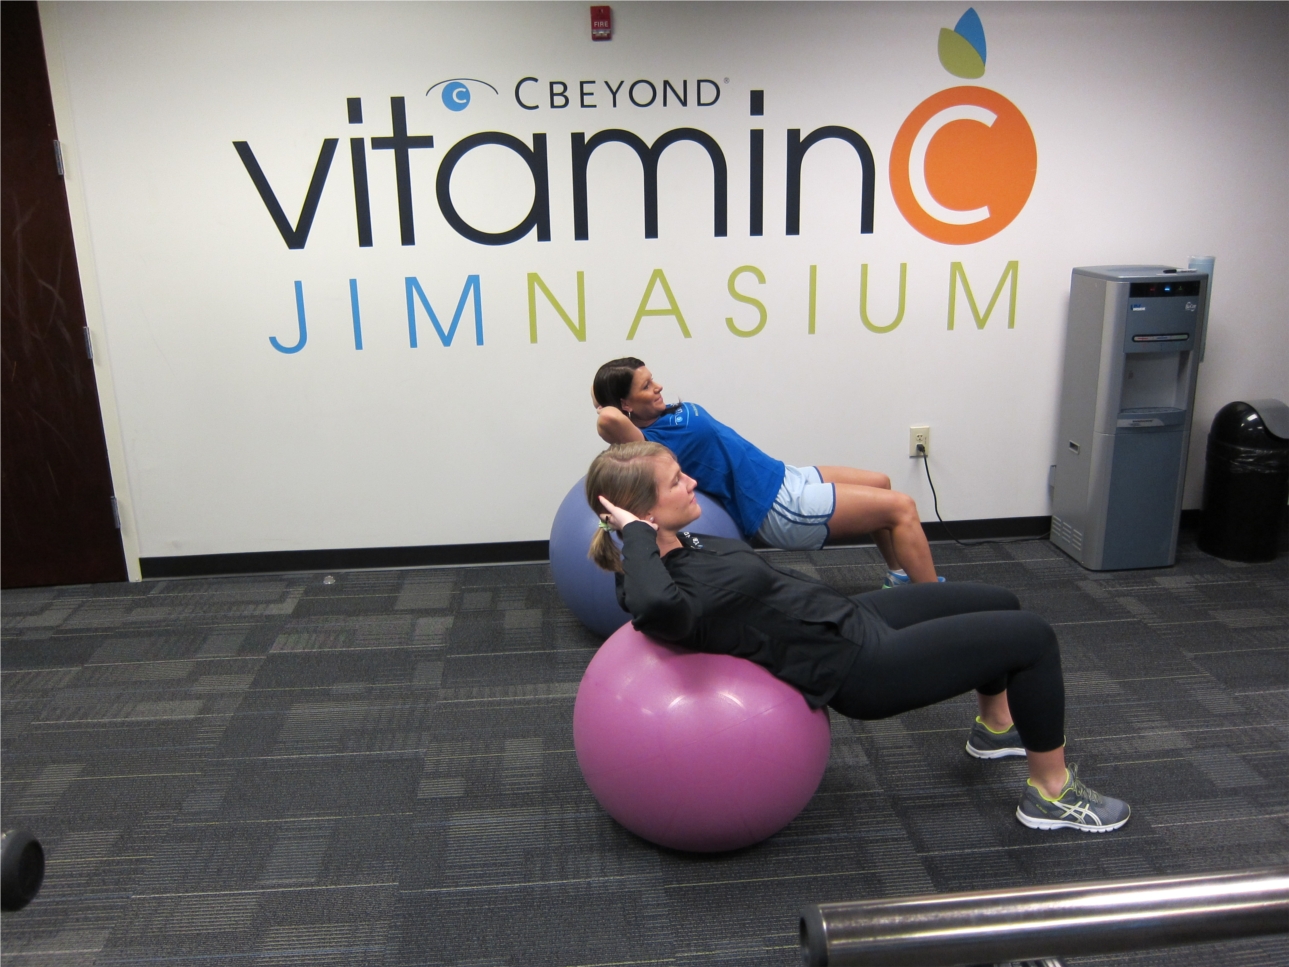 Cbeyond employees Kelly Coffed and Katie Tucker workout in Cbeyond's Jimnasium (named after Cbeyond's Founder, Chairman, President and Chief Executive Officer) 